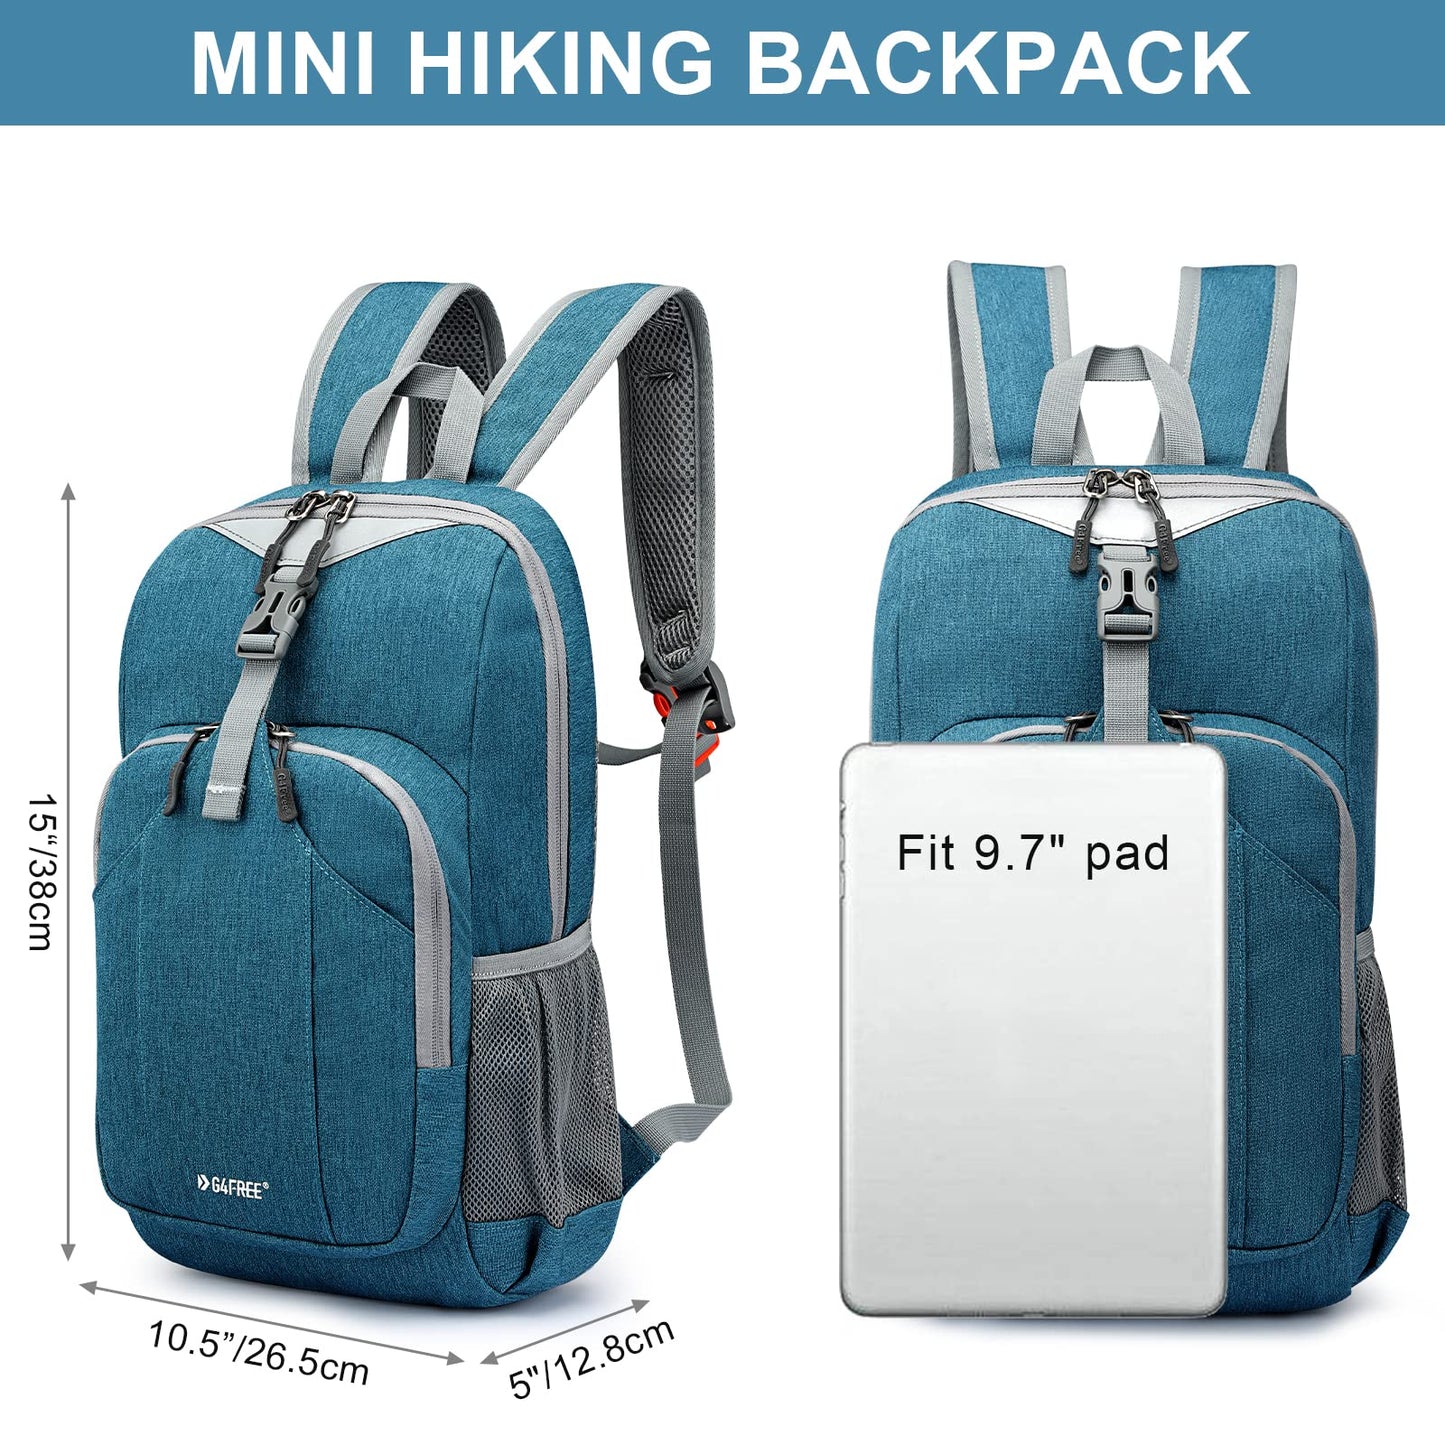 G4Free Mini 10L Hiking Daypack Small Hiking Backpack Cycling Compact Shoulder School Backpack Outdoor for Men Women